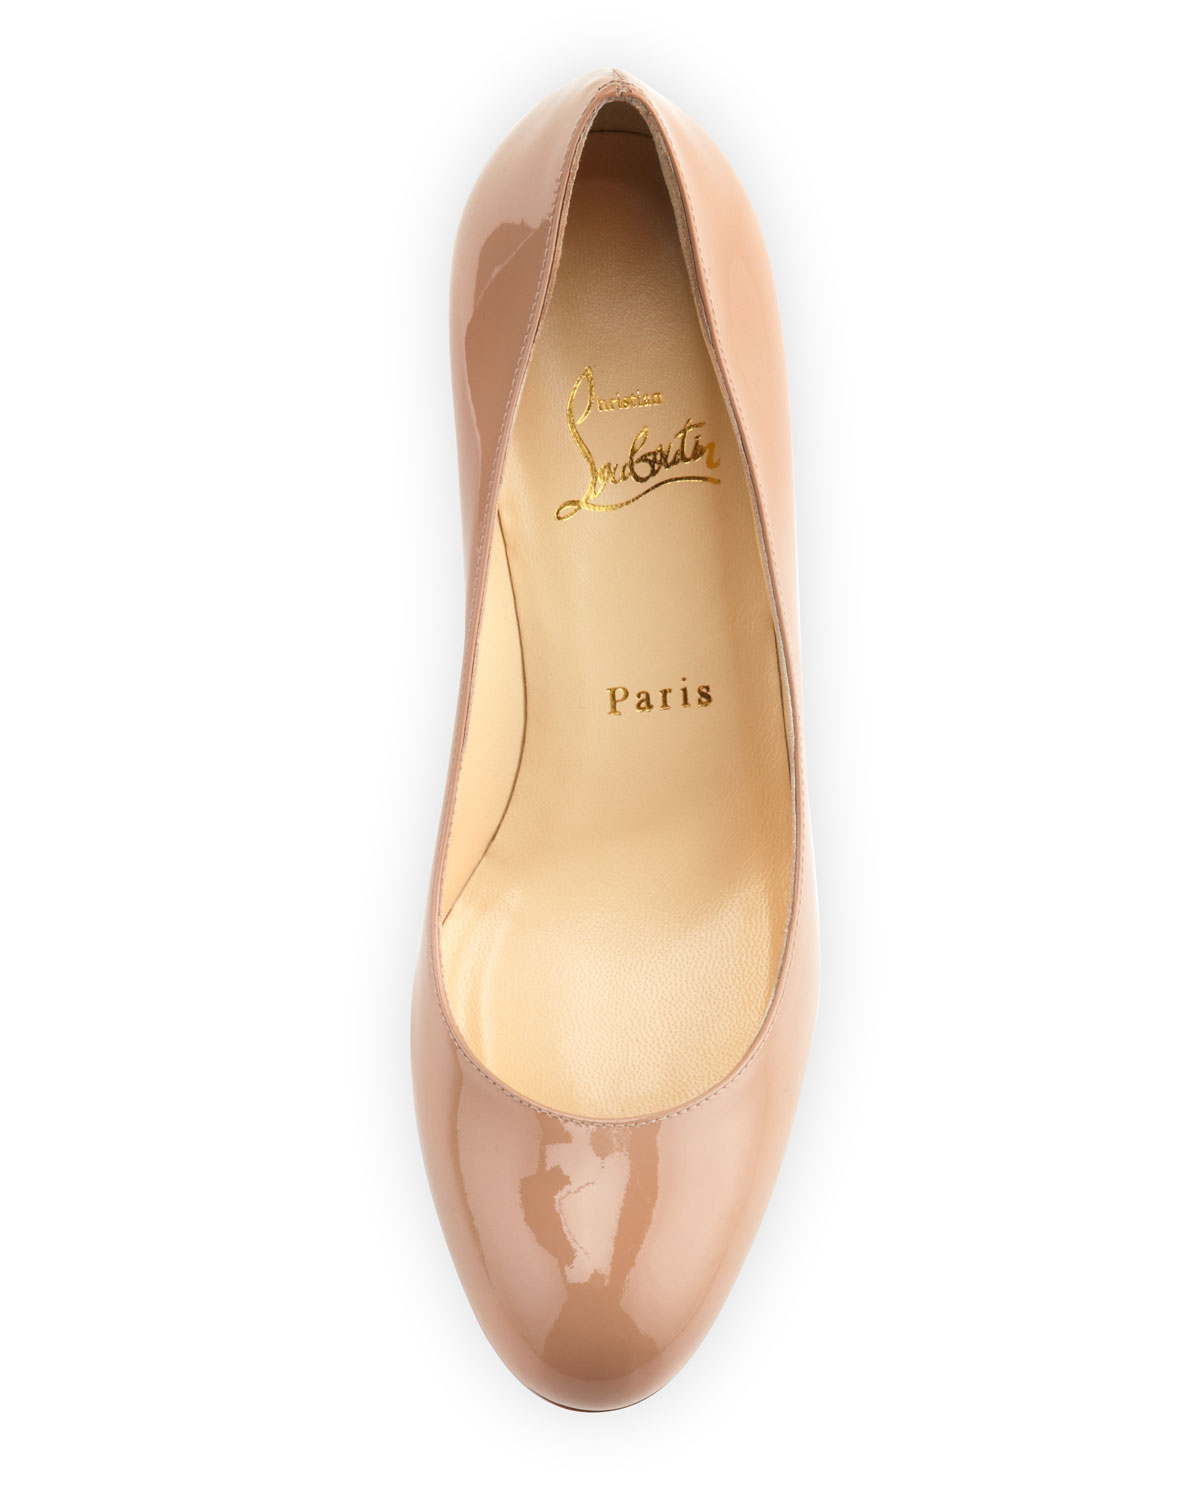 Christian louboutin Simple Patent Red Sole Pump Nude in Beige ...  